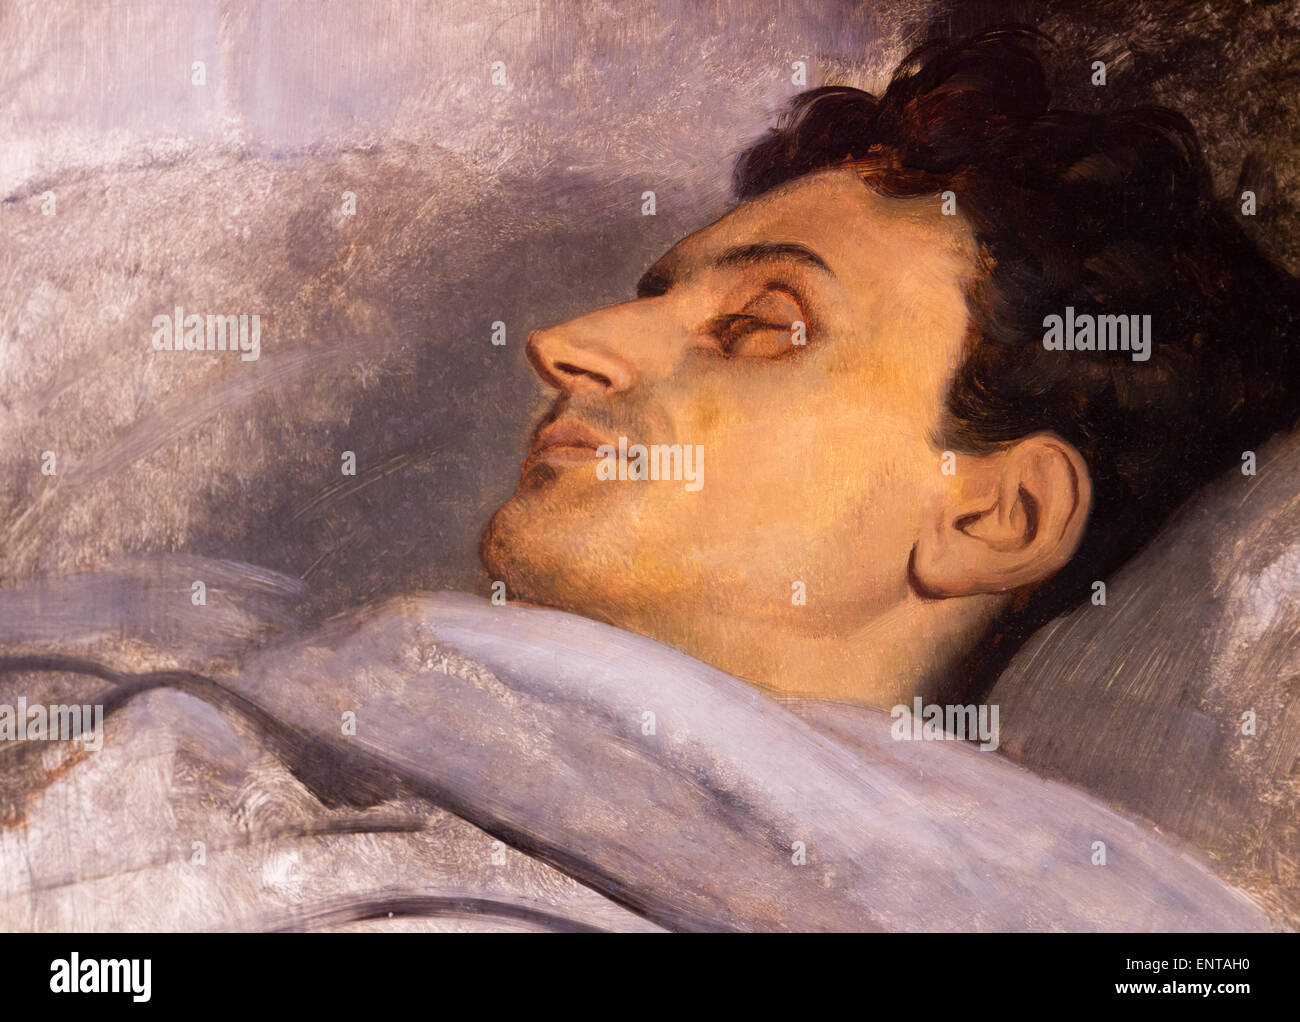 ActiveMuseum 0006137.jpg / Armand Carrel on his deathbed 04/12/2013  -   / 19th century Collection / Active Museum Stock Photo